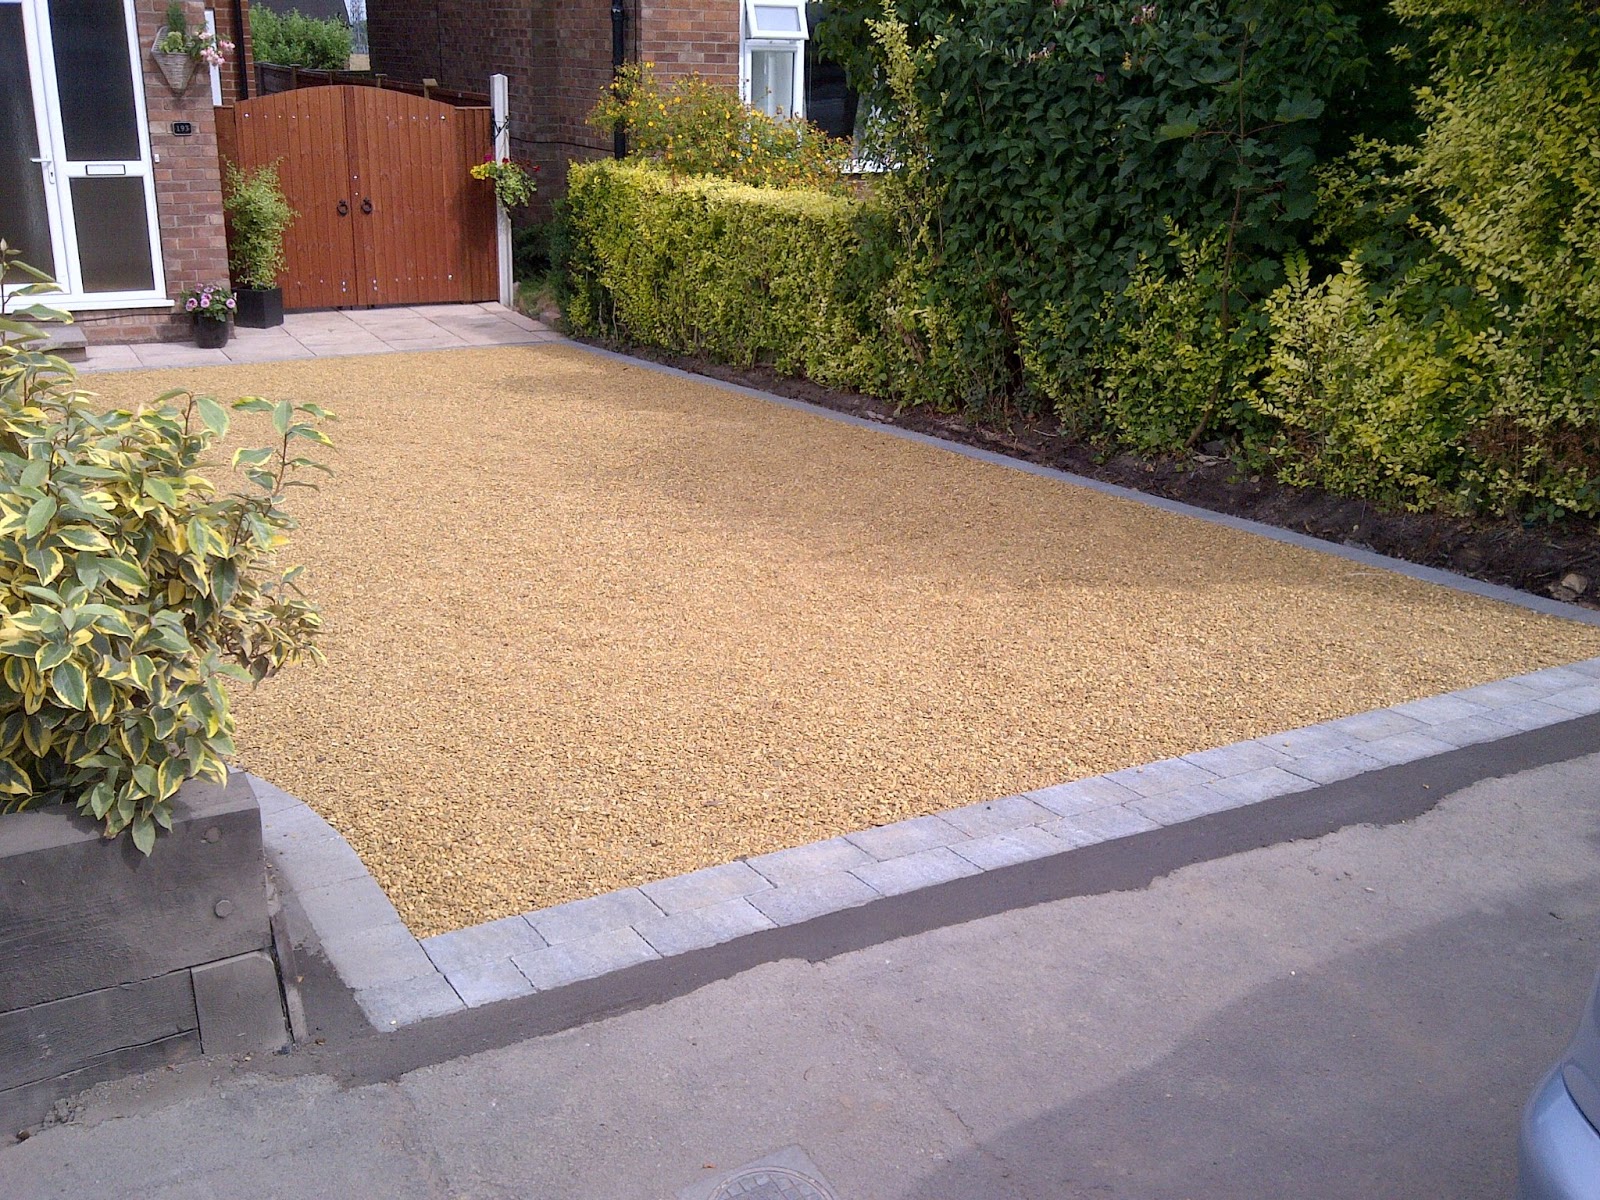 Sale Fencing and Surfacing - driveways Manchester: Driveways